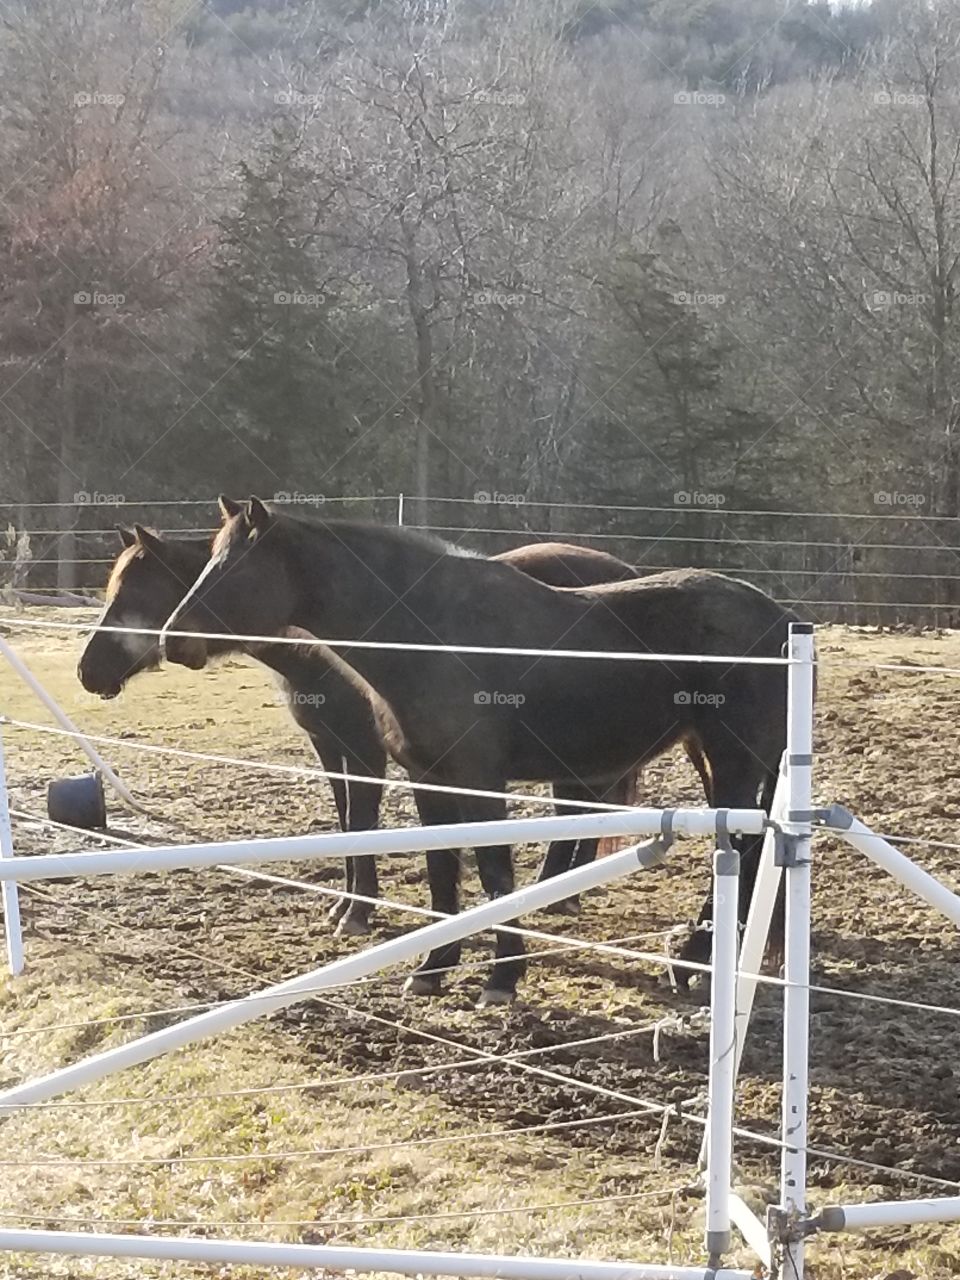 Two horses on a farm in rural Connecticut.